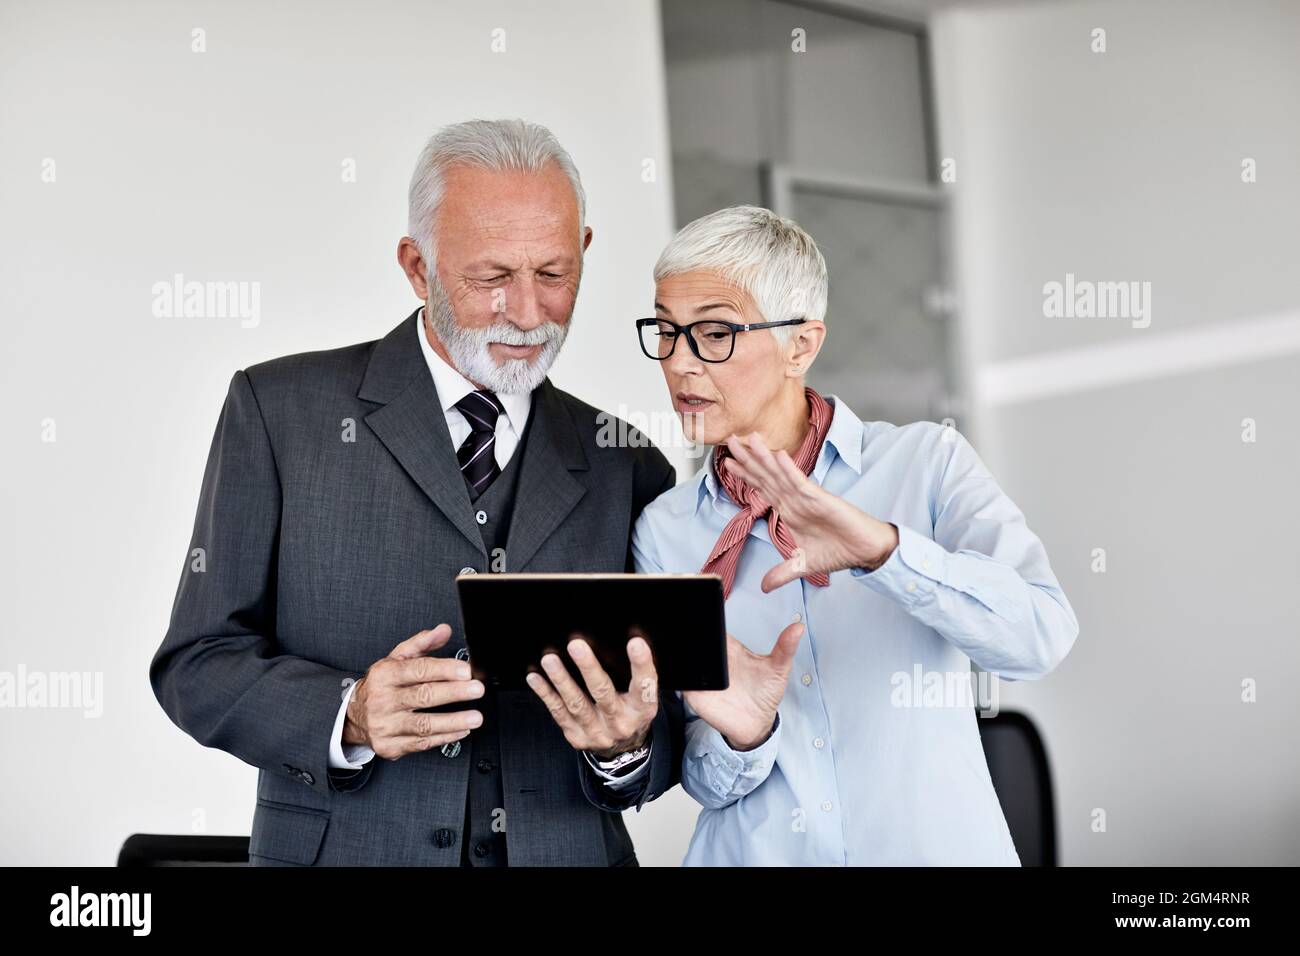 business office person discussion tablet teamwork senior meeting Stock Photo